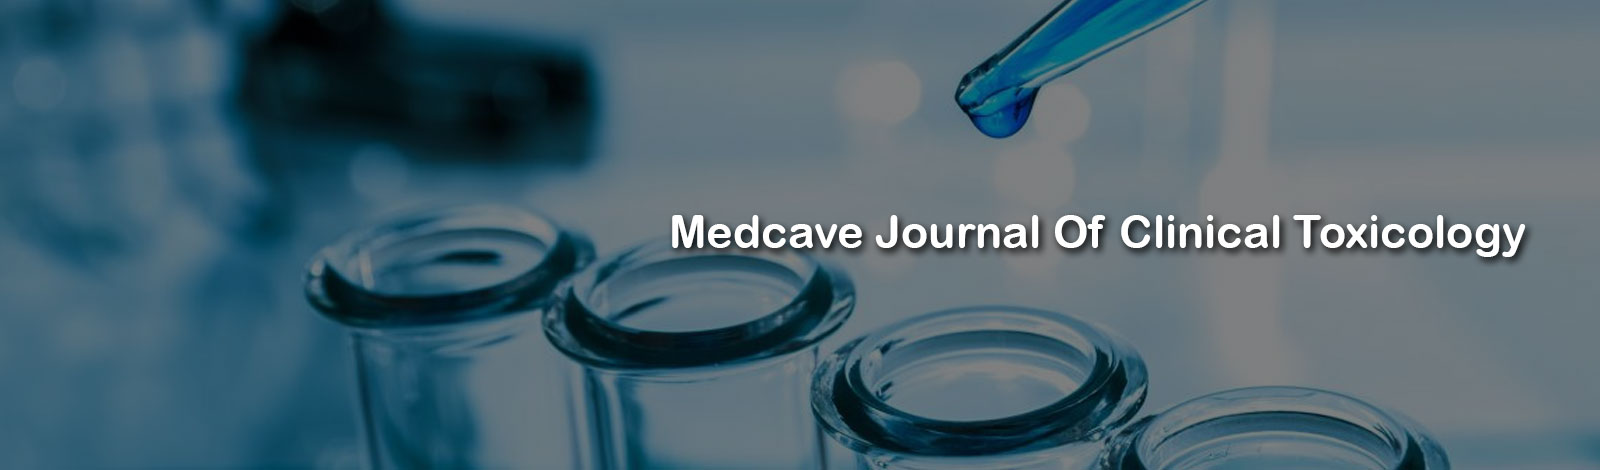 Medcave Journal of Clinical Toxicology